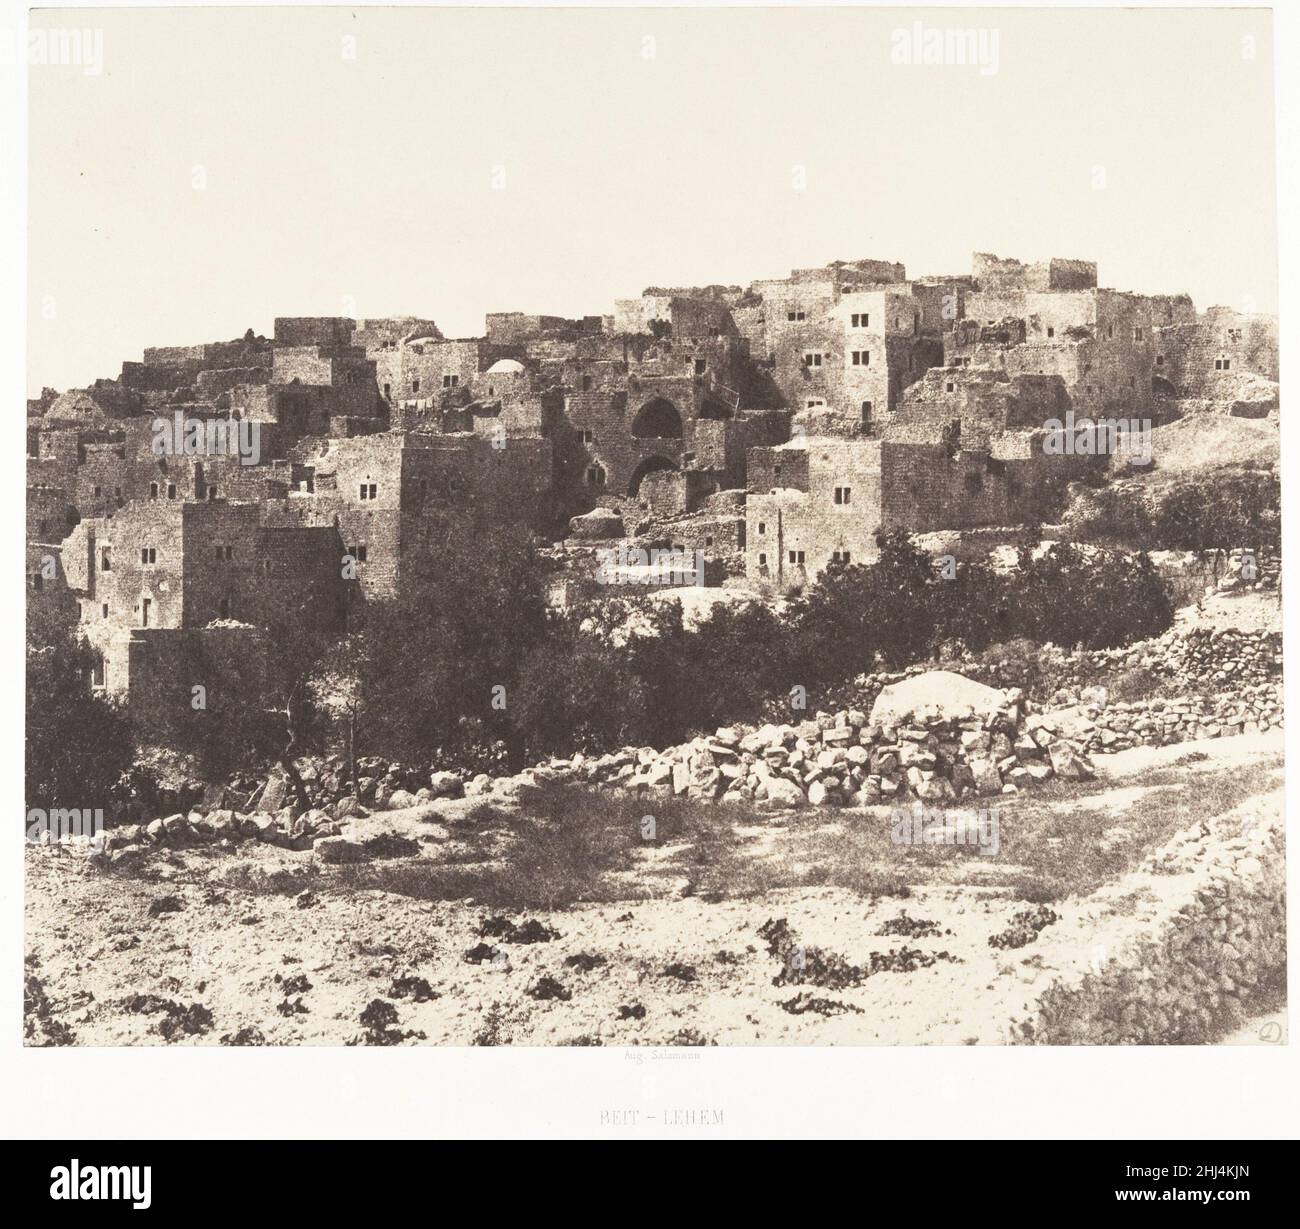 Jérusalem, Beit-Lehem, Vue générale 1854 Auguste Salzmann French Viewed from afar, the small, dark windows of Bethlehem’s geometric dwellings evoke the words of Salzmann’s countryman, the explorer François-René de Chateaubriand: 'This sacred land dares no longer express its joy, and locks within its bosom the recollections of its glory.' Other accounts, however, describe a bustling nineteenth-century city that received nearly as many visitors as the much larger Jerusalem. Ignoring the everyday life of Ottoman Palestine, Salzmann presented a vacant, closed land.. Jérusalem, Beit-Lehem, Vue géné Stock Photo